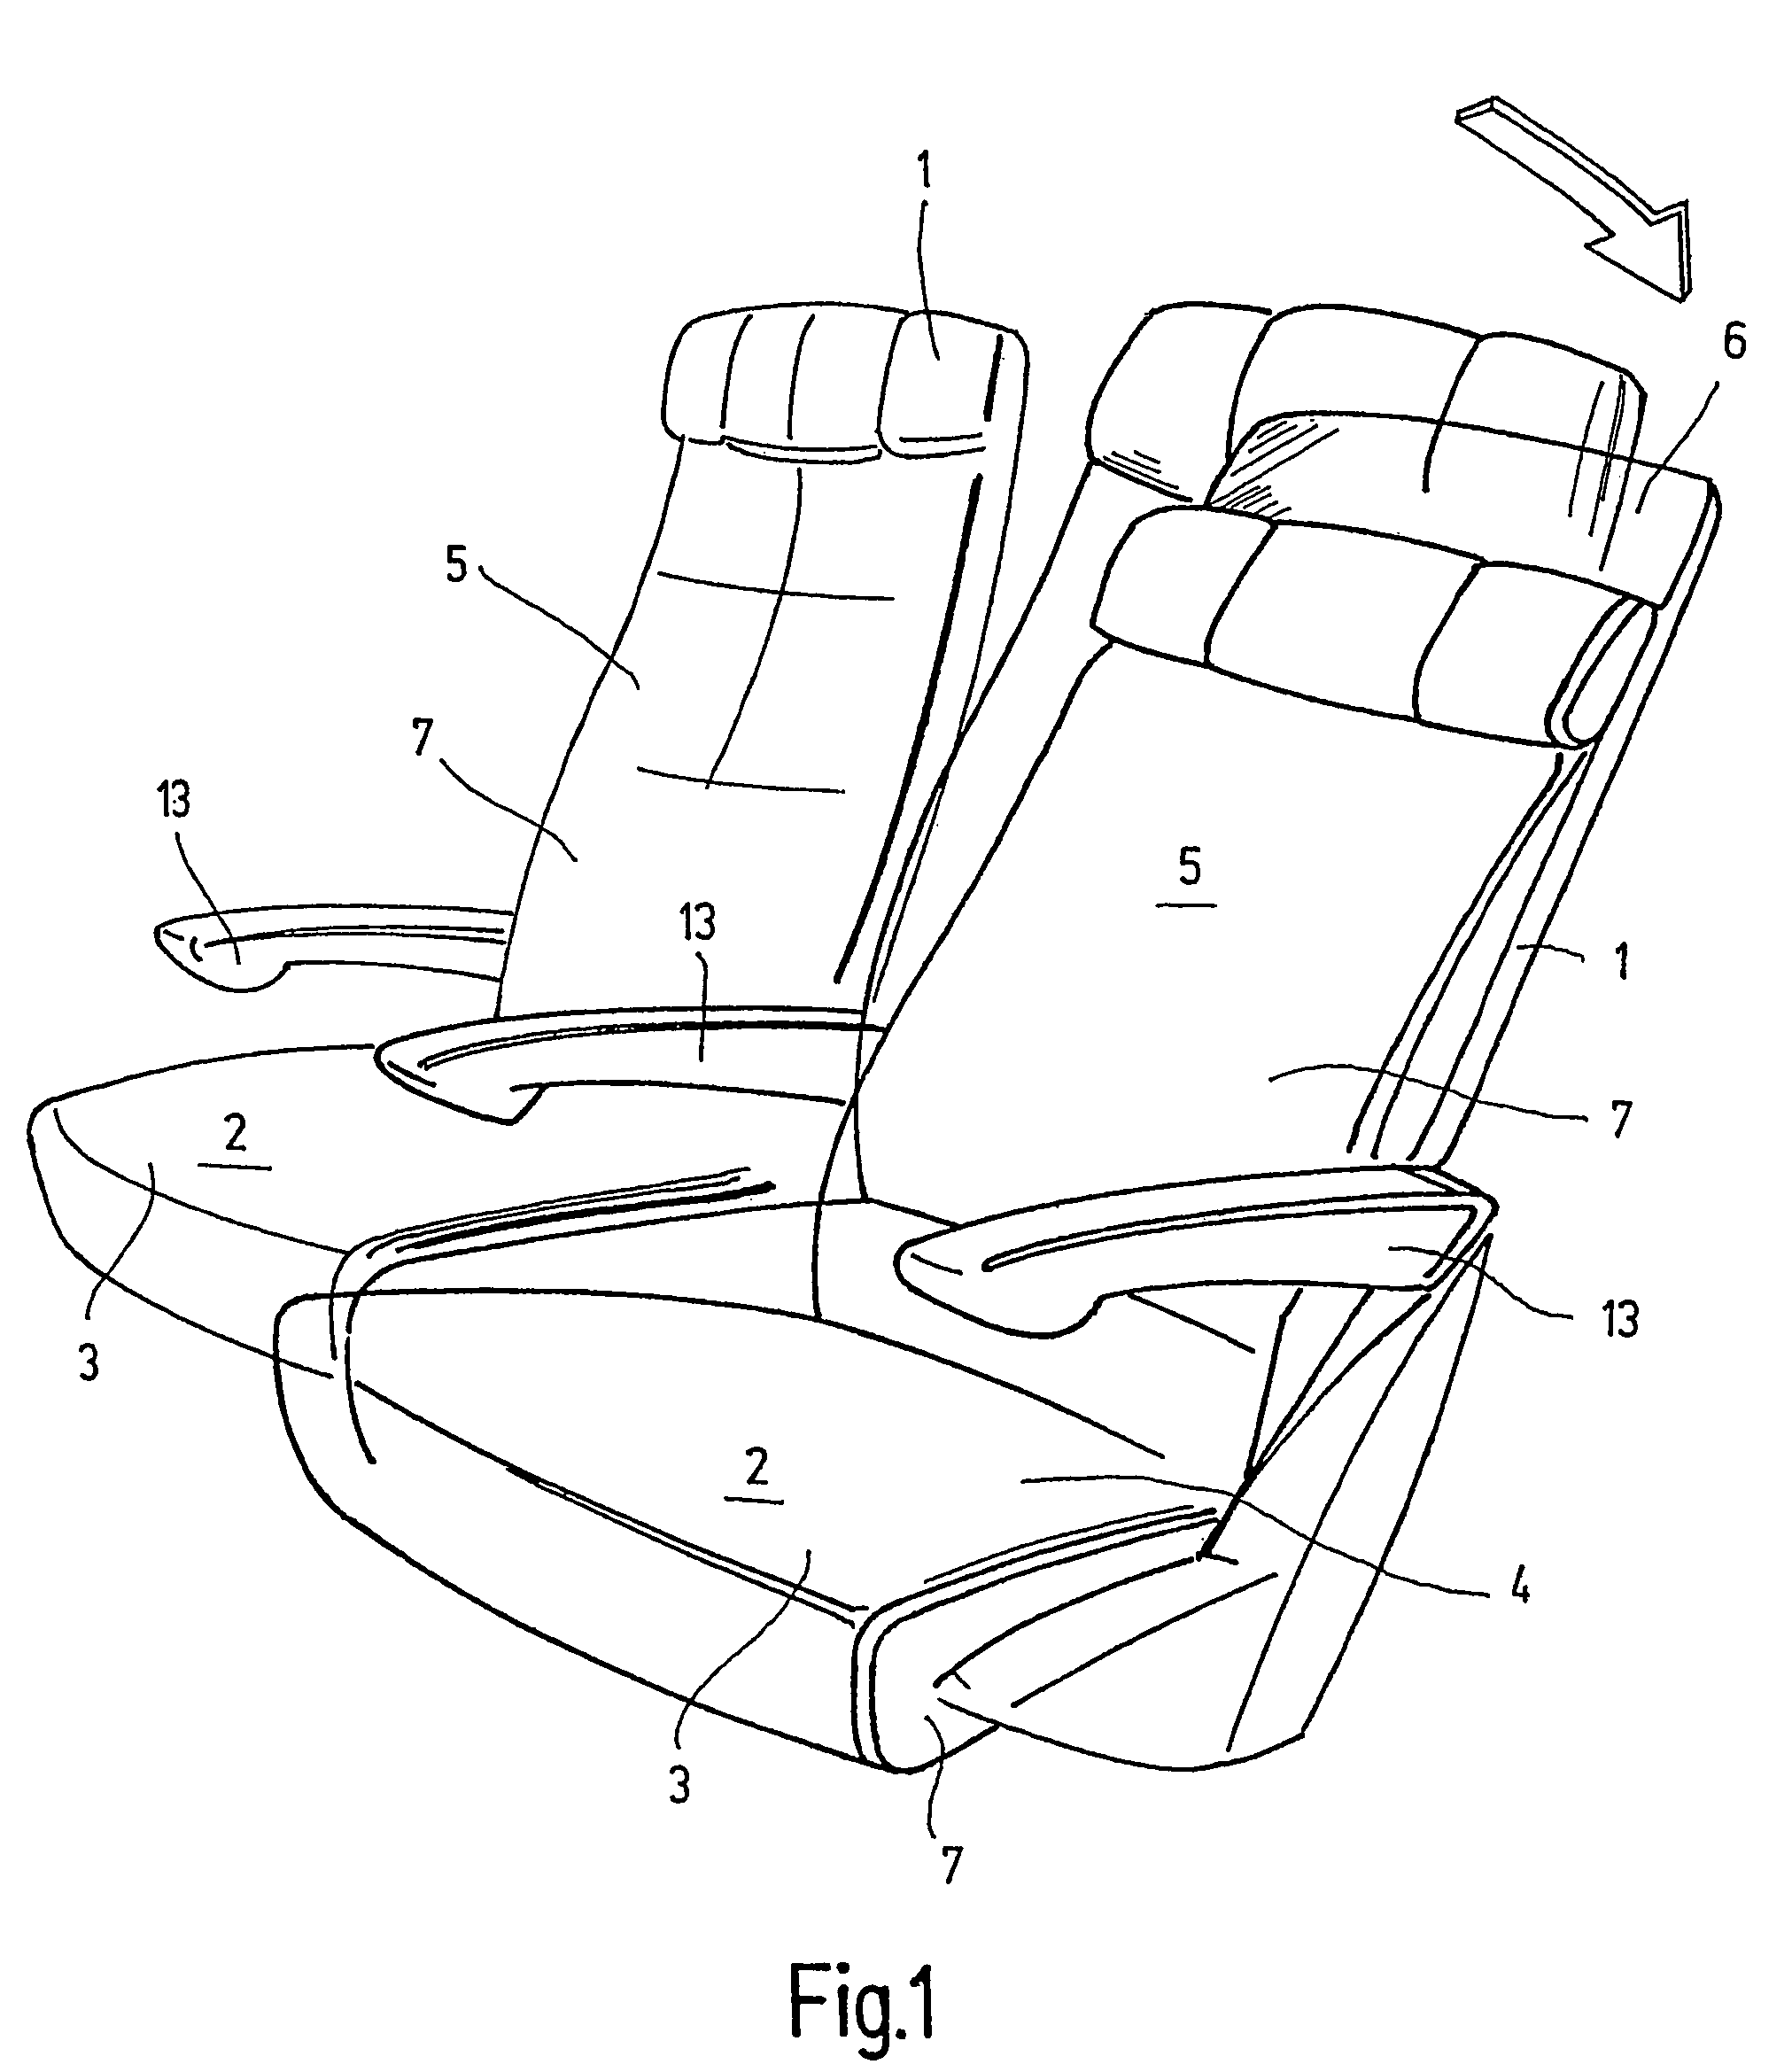 Seat, especially an airplane seat